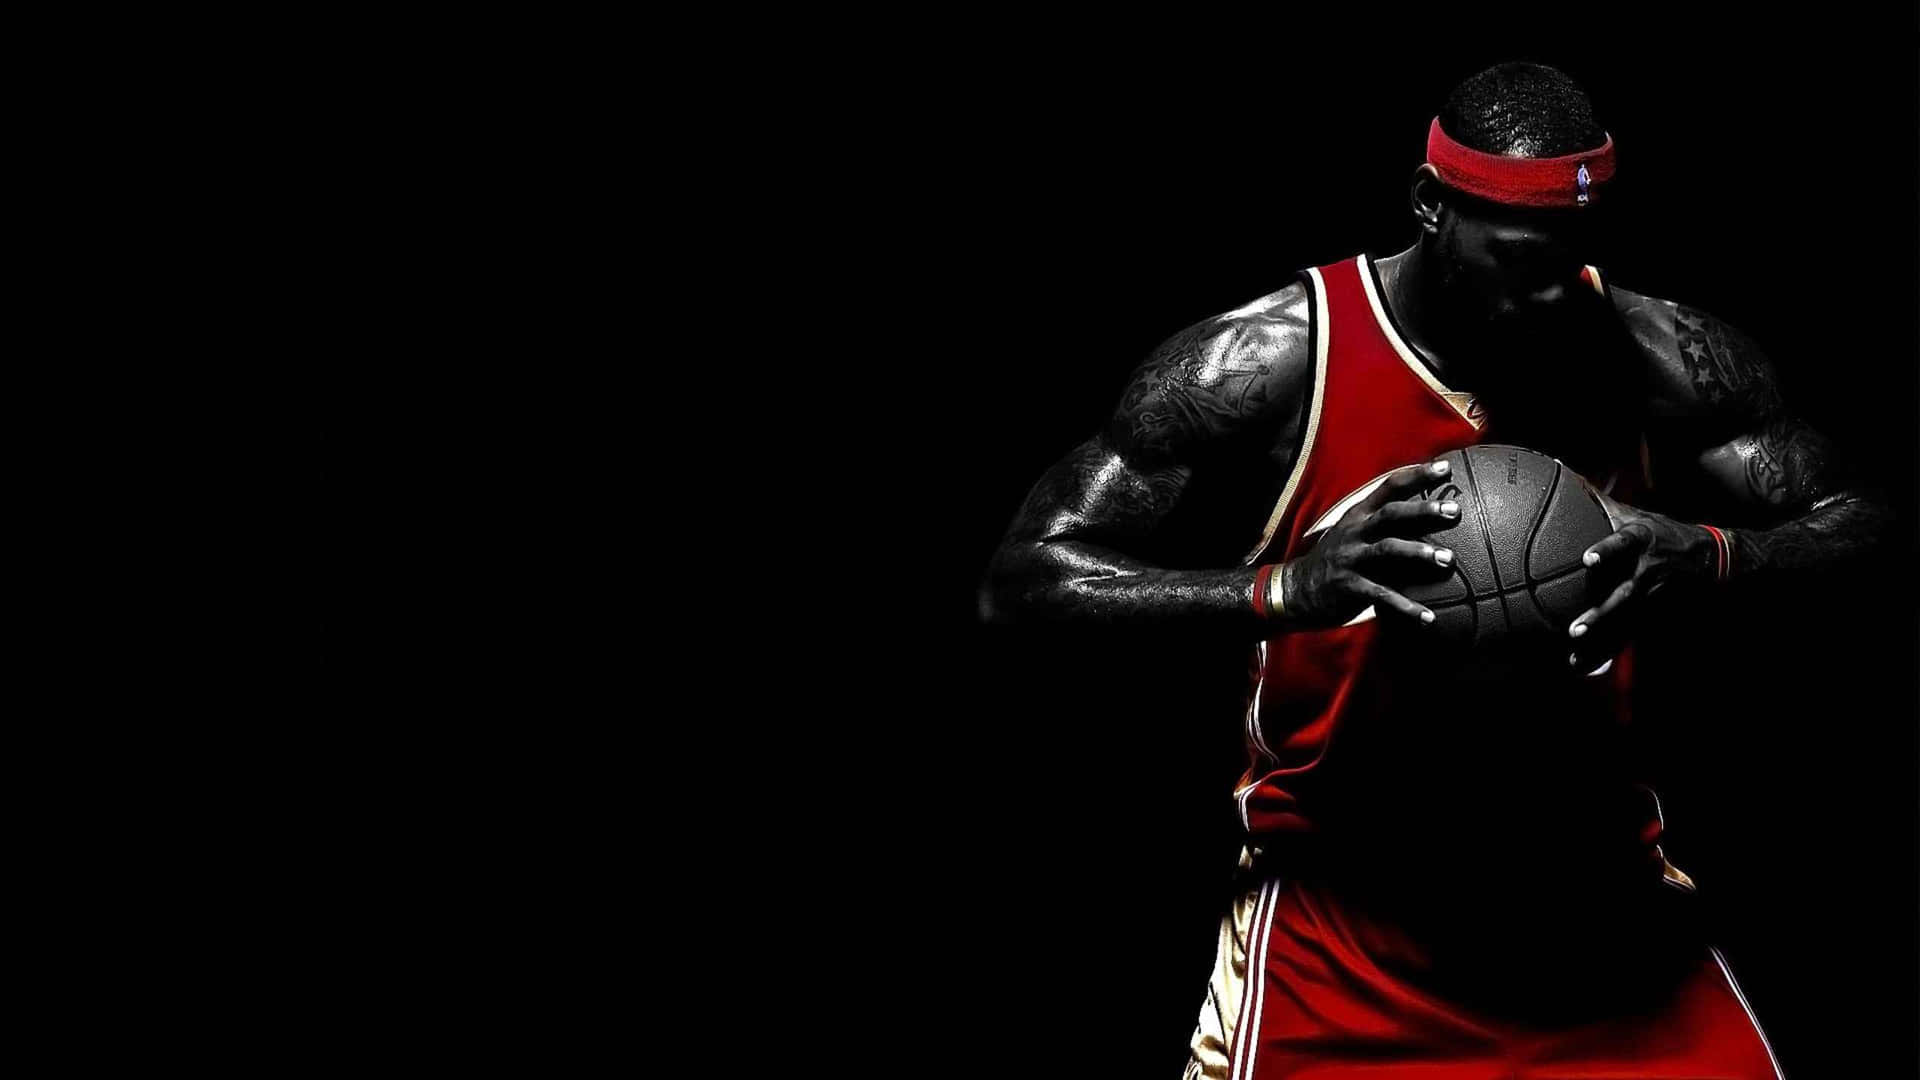 A Basketball Player Holding A Ball In His Hands Wallpaper